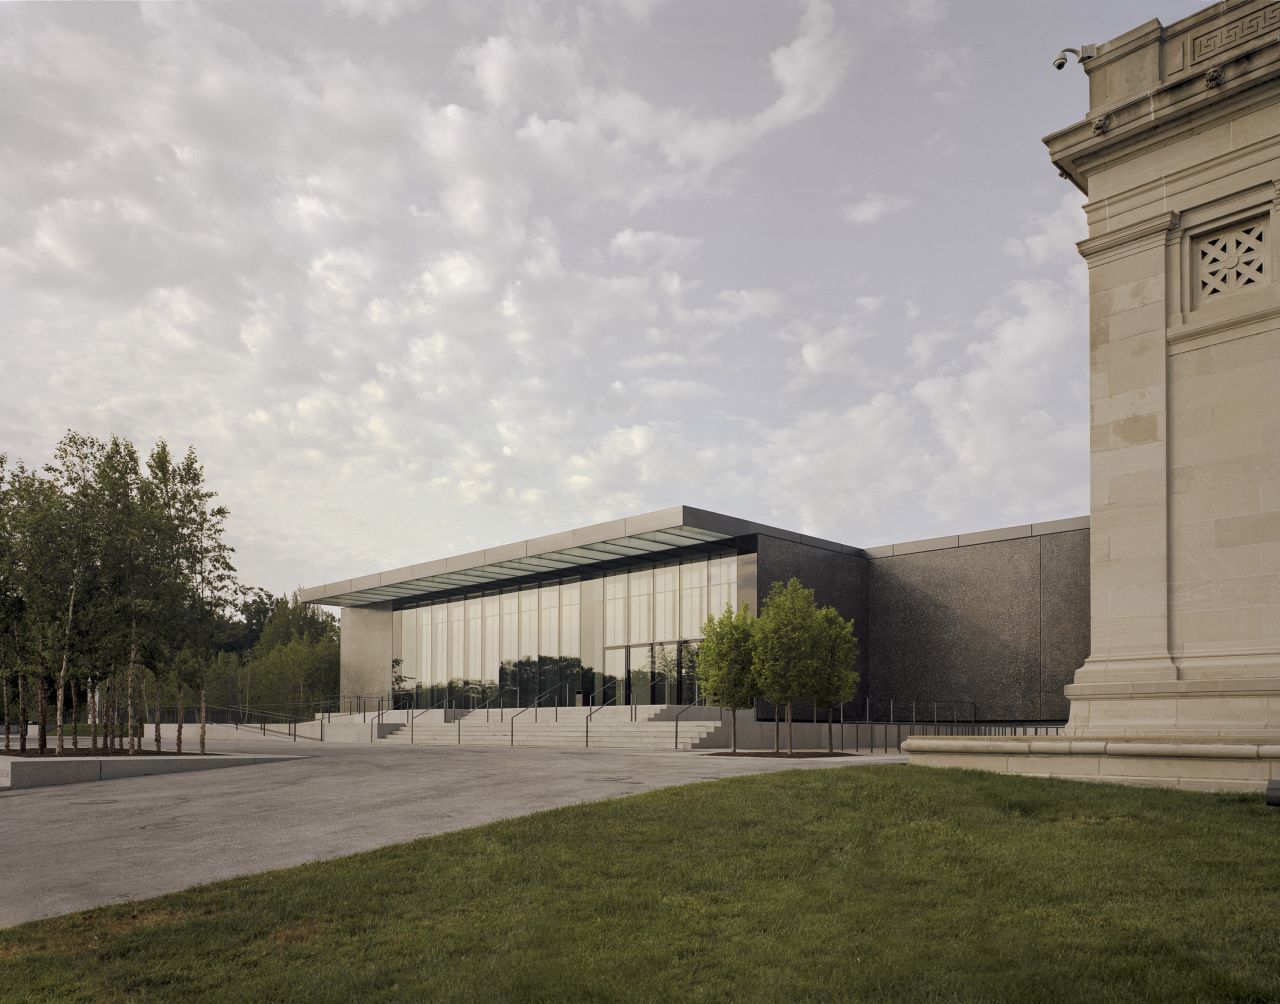 In collaboration with architecture firm HOK, David Chipperfield designed an understated extension to the Saint Louis Art Museum.